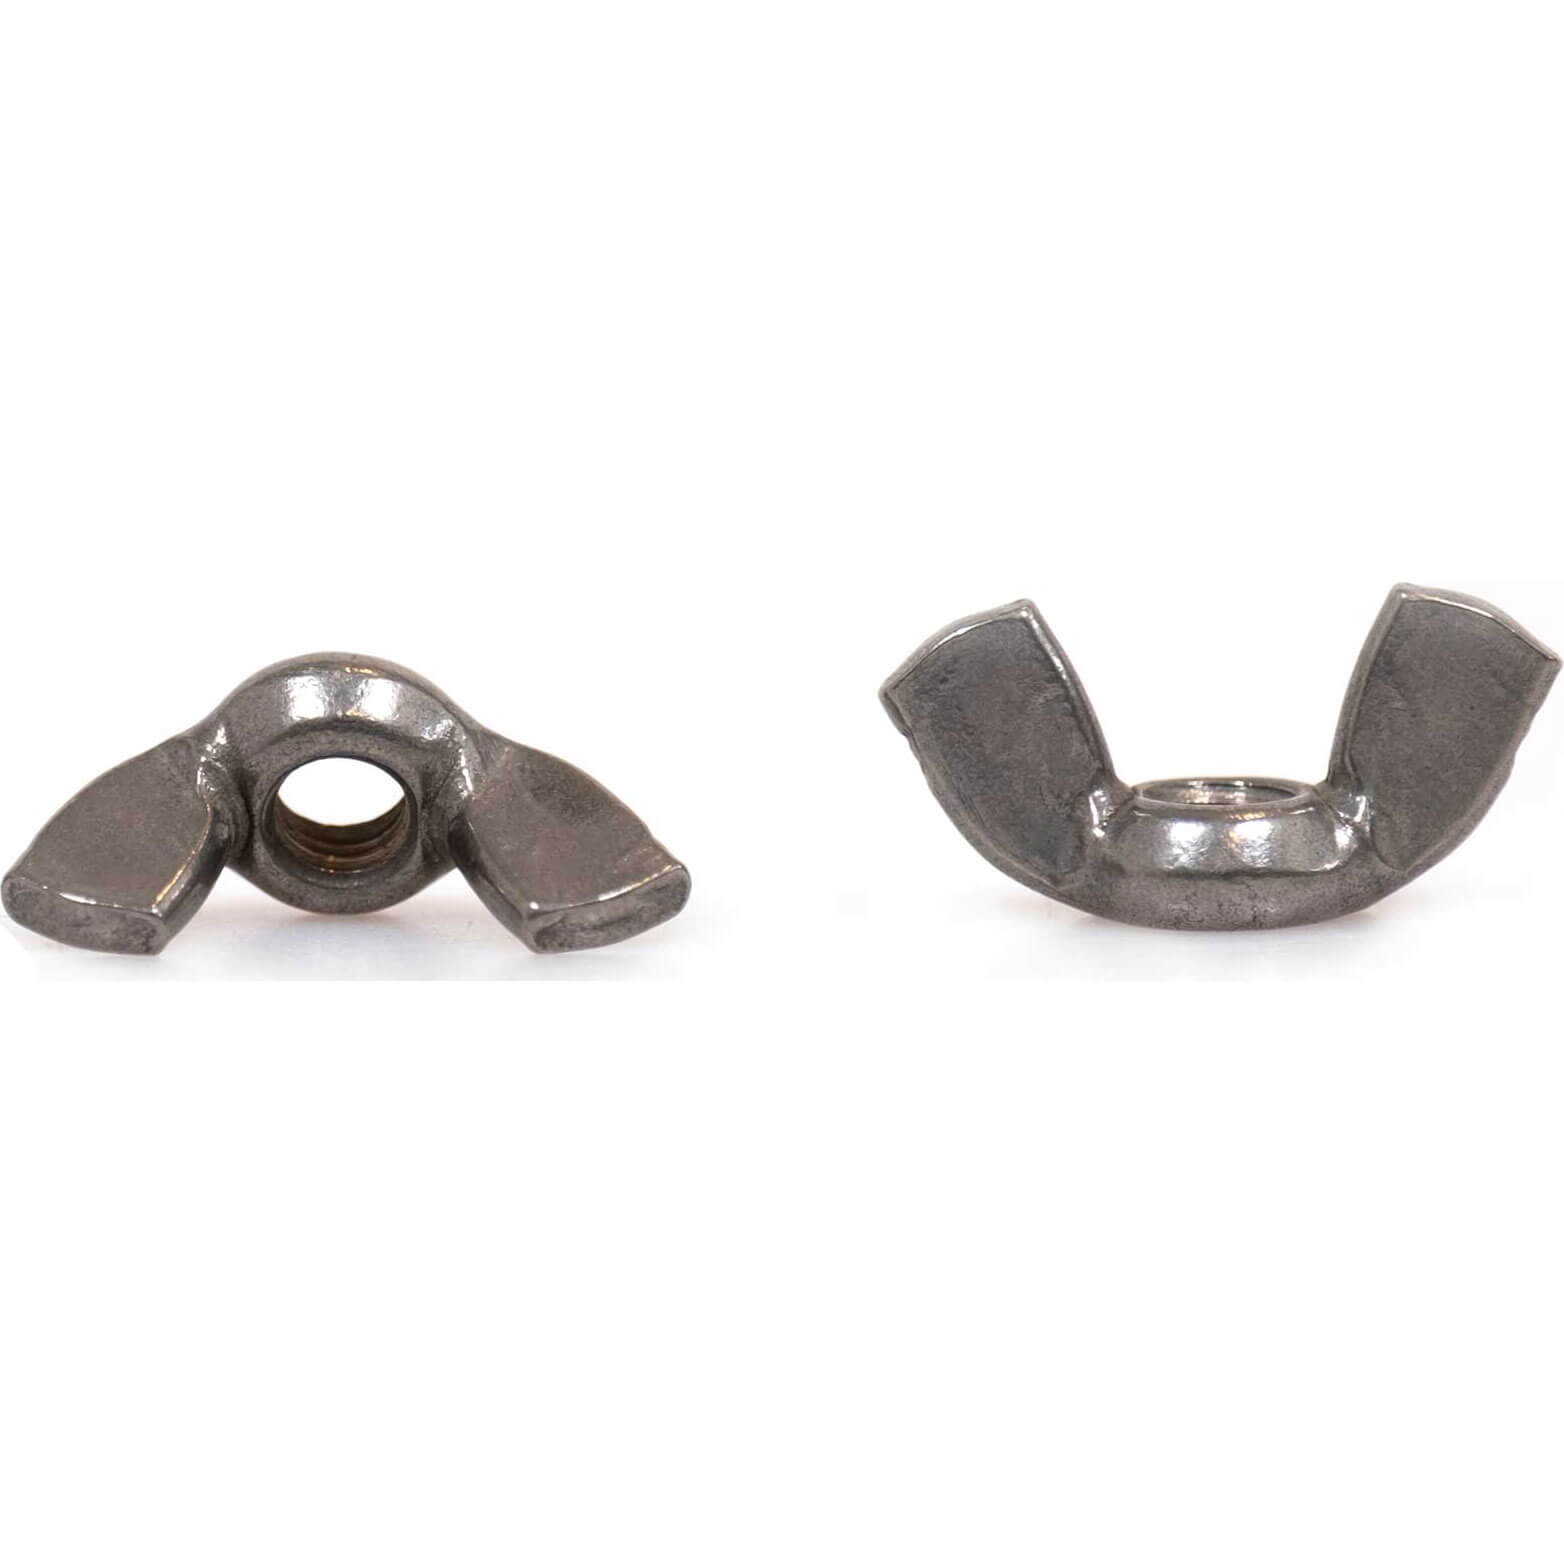 Image of Sirius A4 316 Stainless Steel Wing Nuts M5